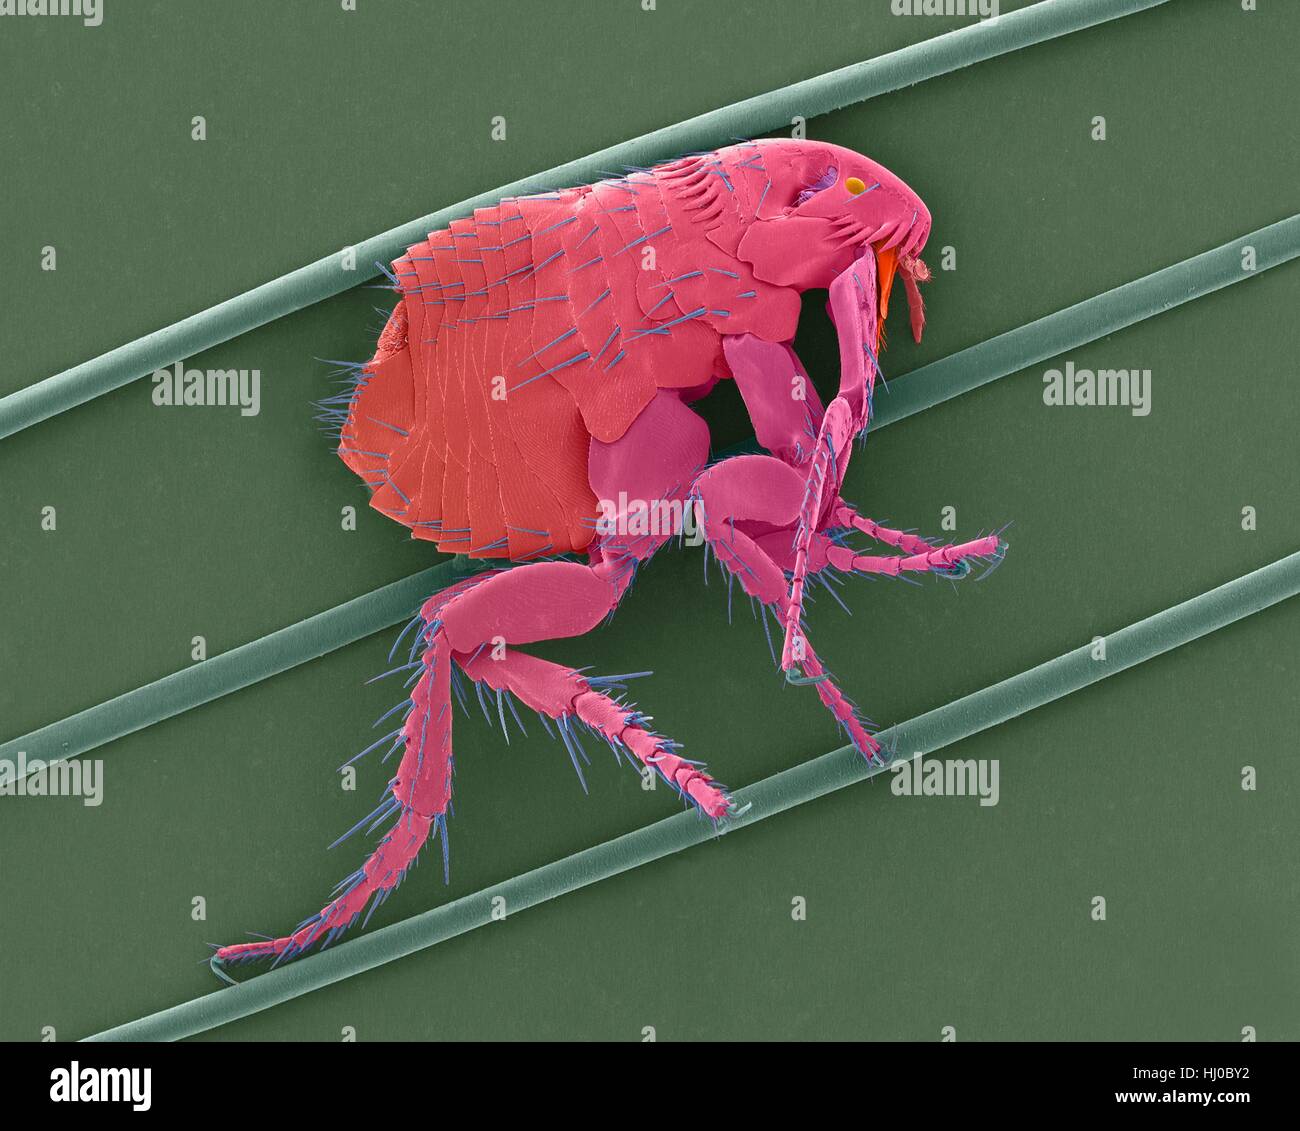 Coloured scanning electron micrograph (SEM) of common dog flea (Ctenocephalides canis) on dog hair.This flea lives as ectoparasite on wide variety of mammals,in particular domestic dog or cat.This flea serves as intermediate host of dog tapeworm (Dipylidium caninum).Although they feed on blood of Stock Photo